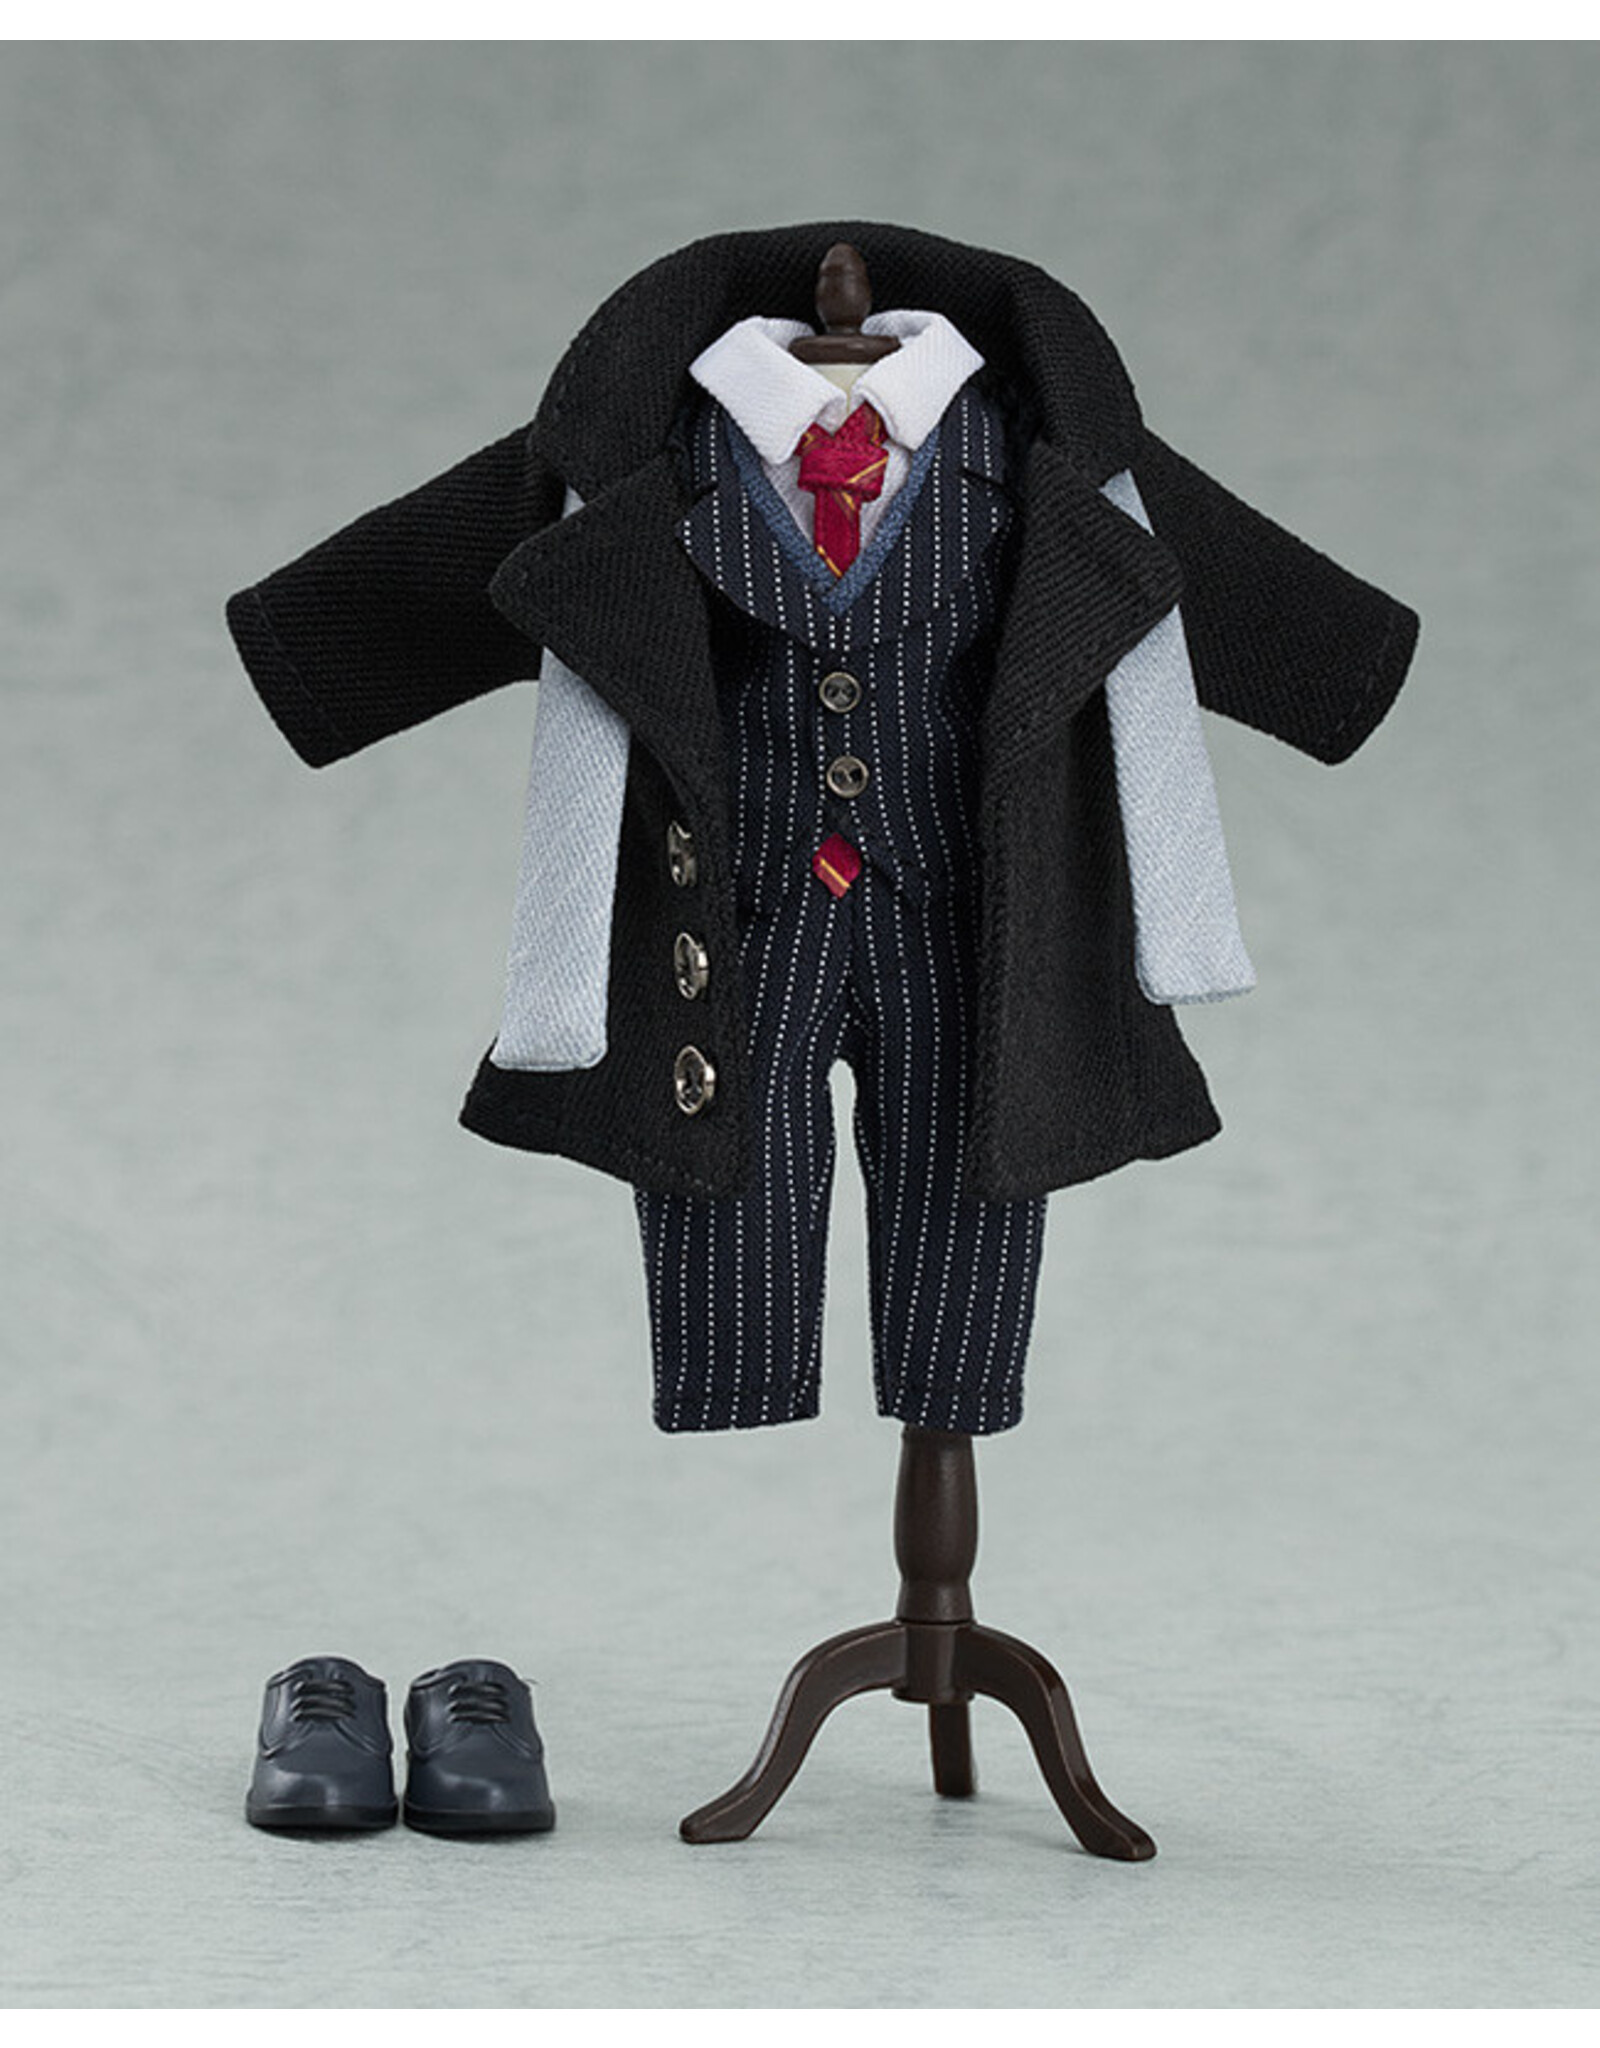 Nendoroid Doll Victor: If Time Flows Back Ver. Outfit